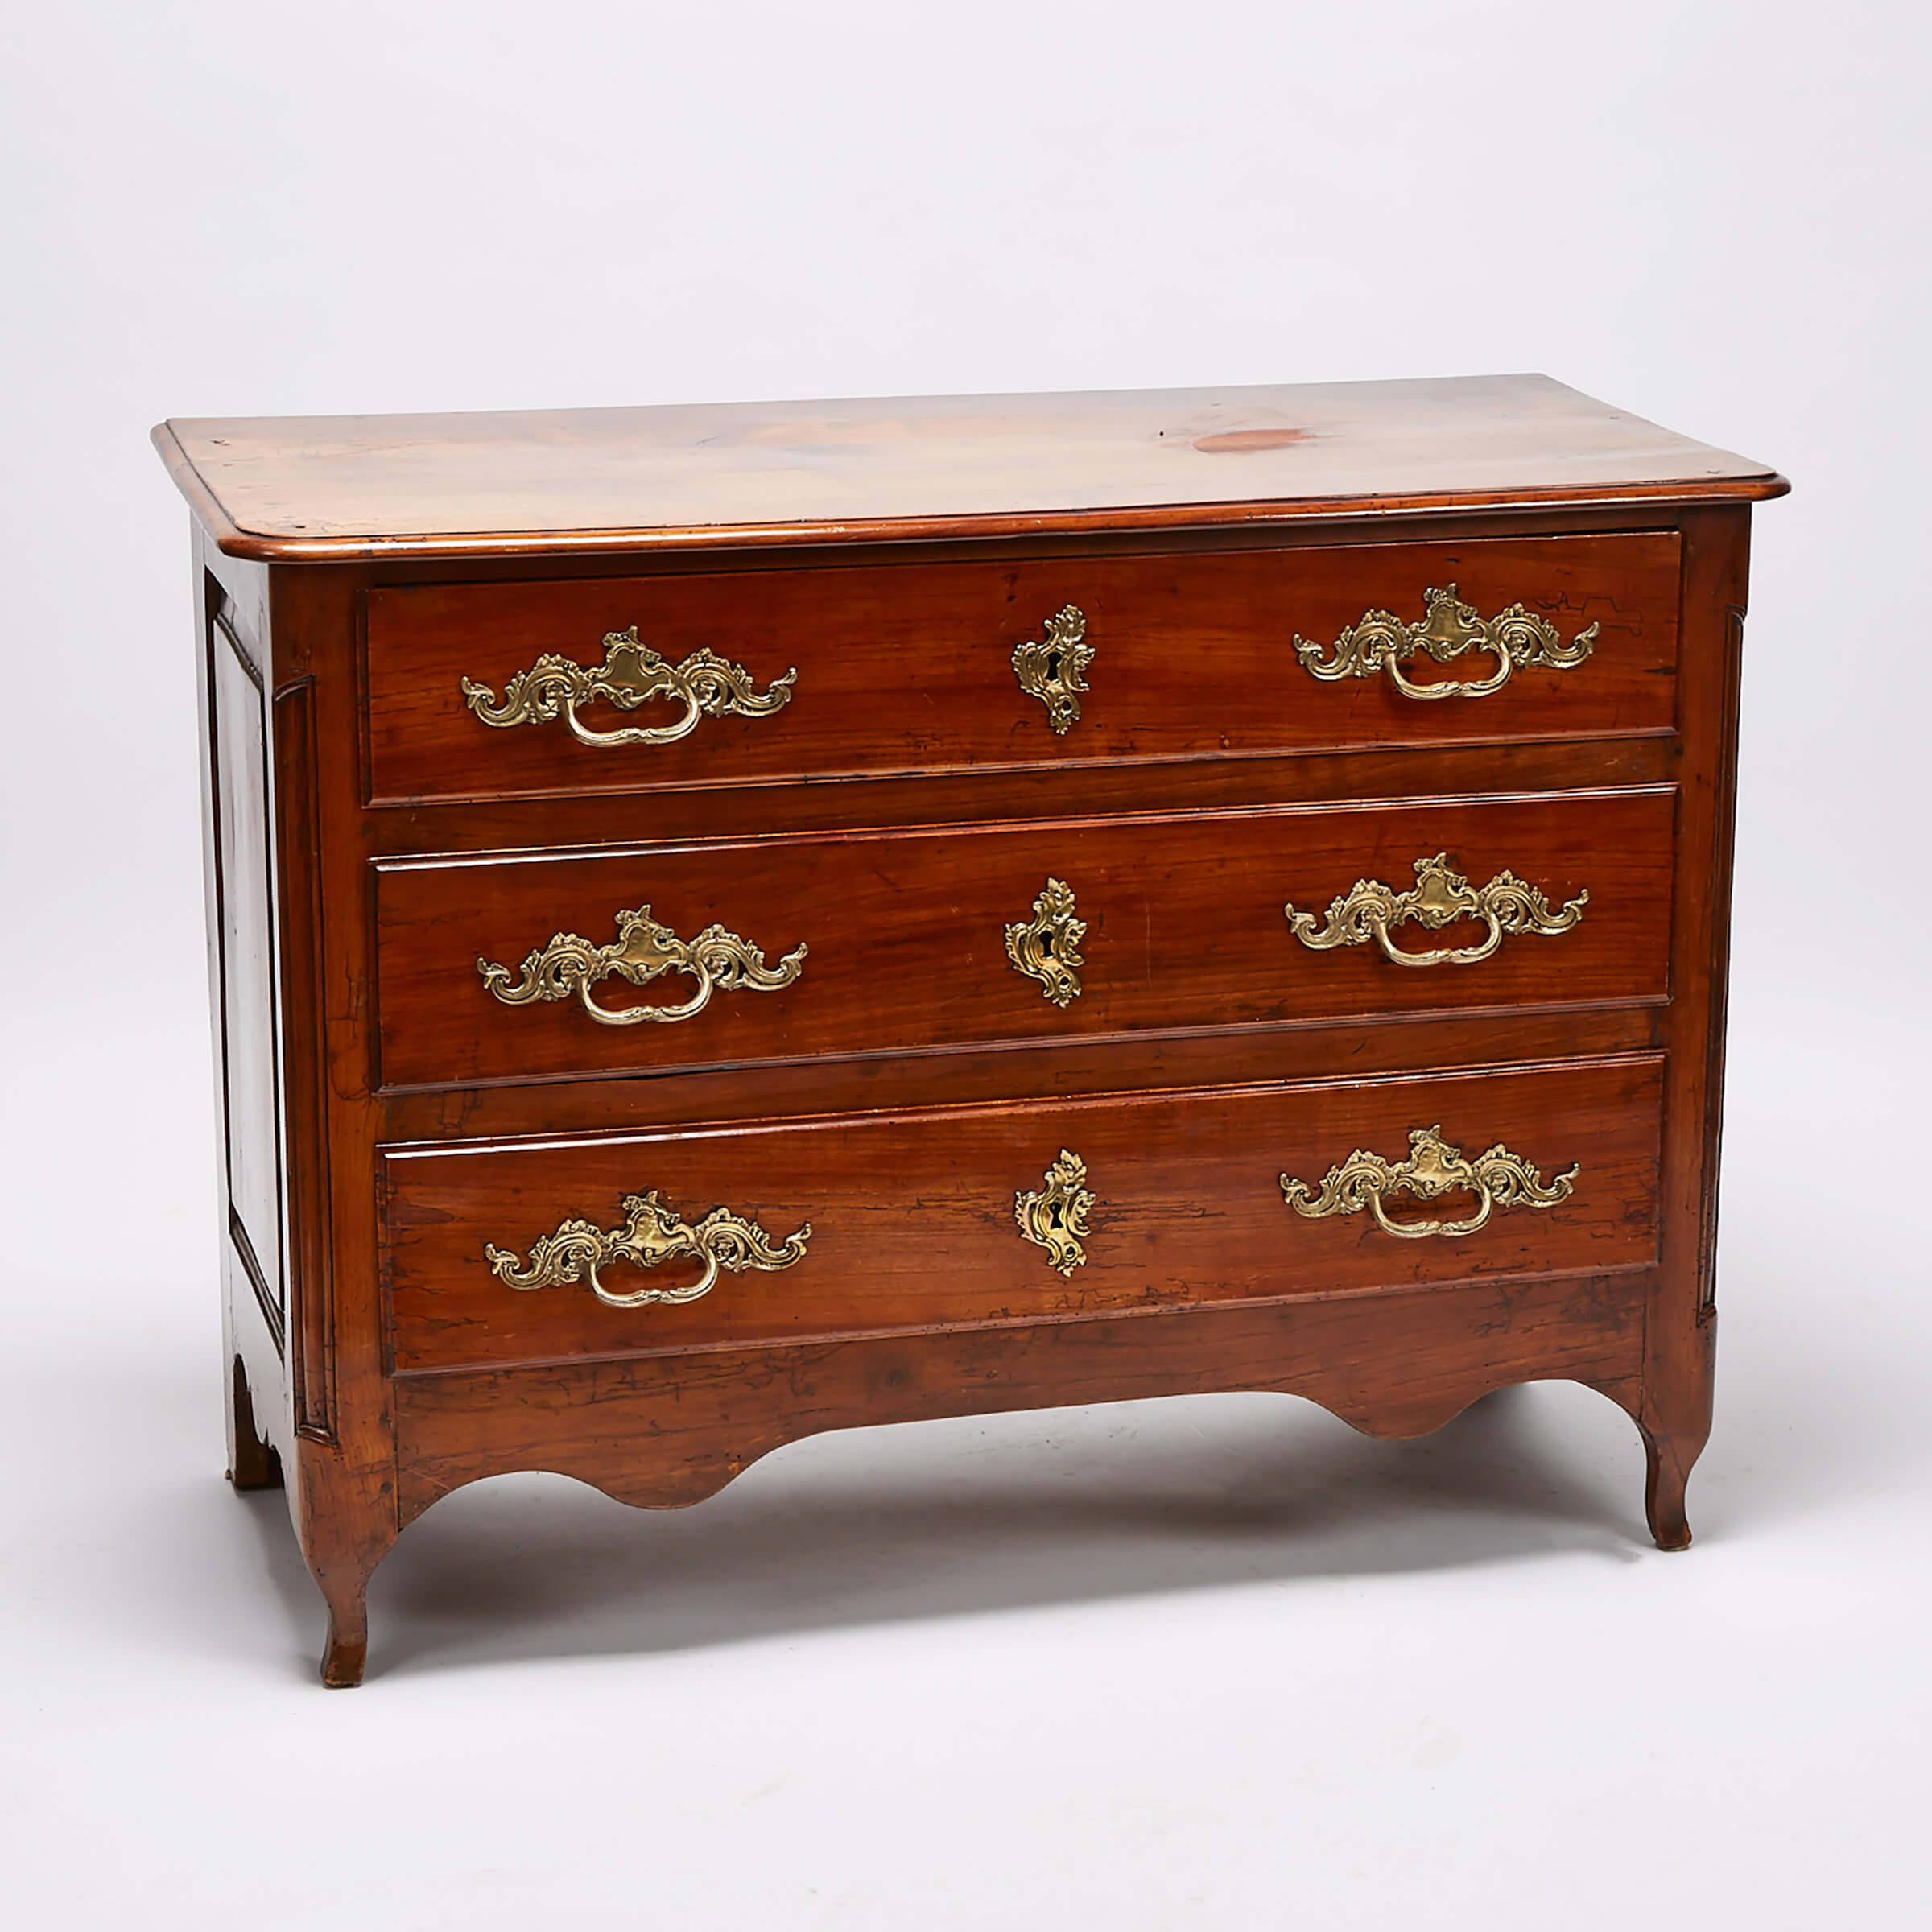 French Provincial Walnut Commode, 18th century